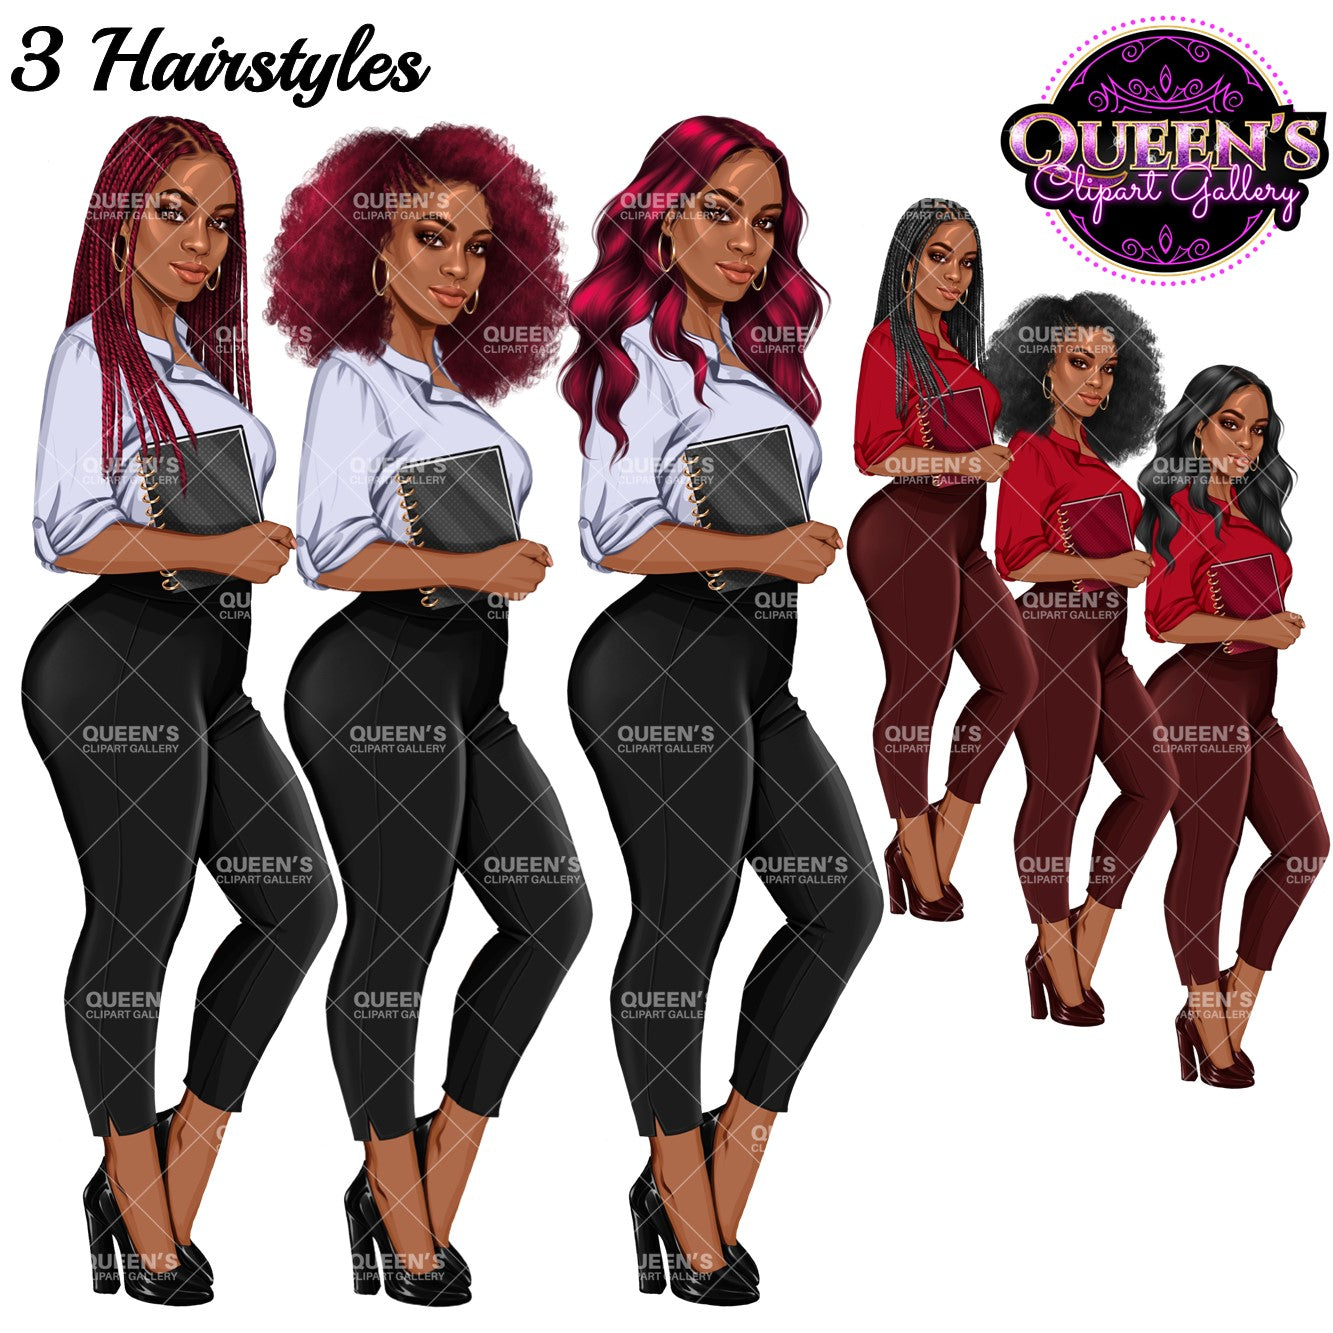 Planner girl clipart, Lady boss clipart, Afro girl clipart, Fashion girl clipart, Teacher clipart, Black girl magic, African American woman